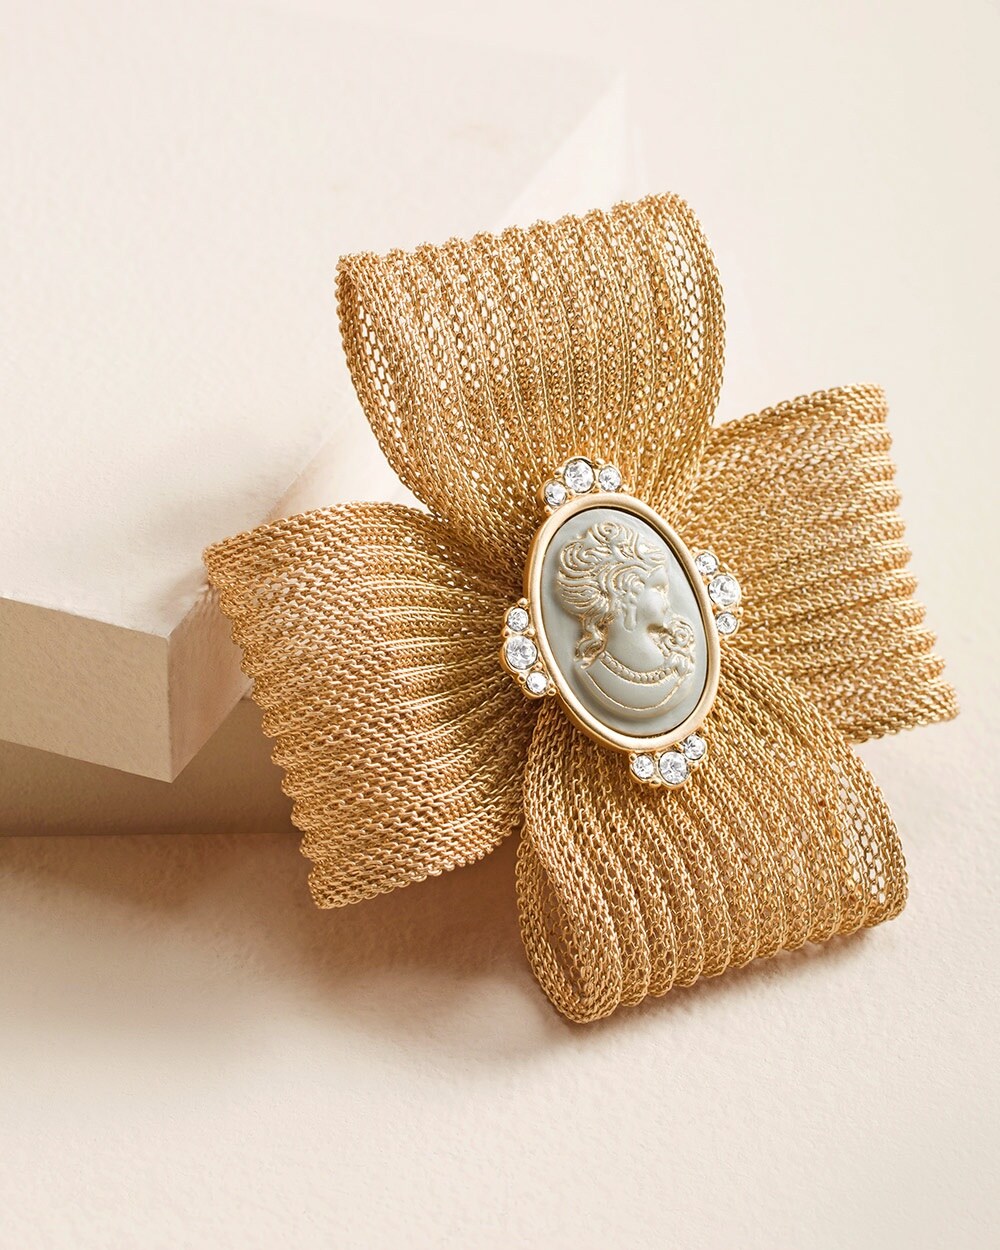 Goldtone Bow Pin with Cameo Design